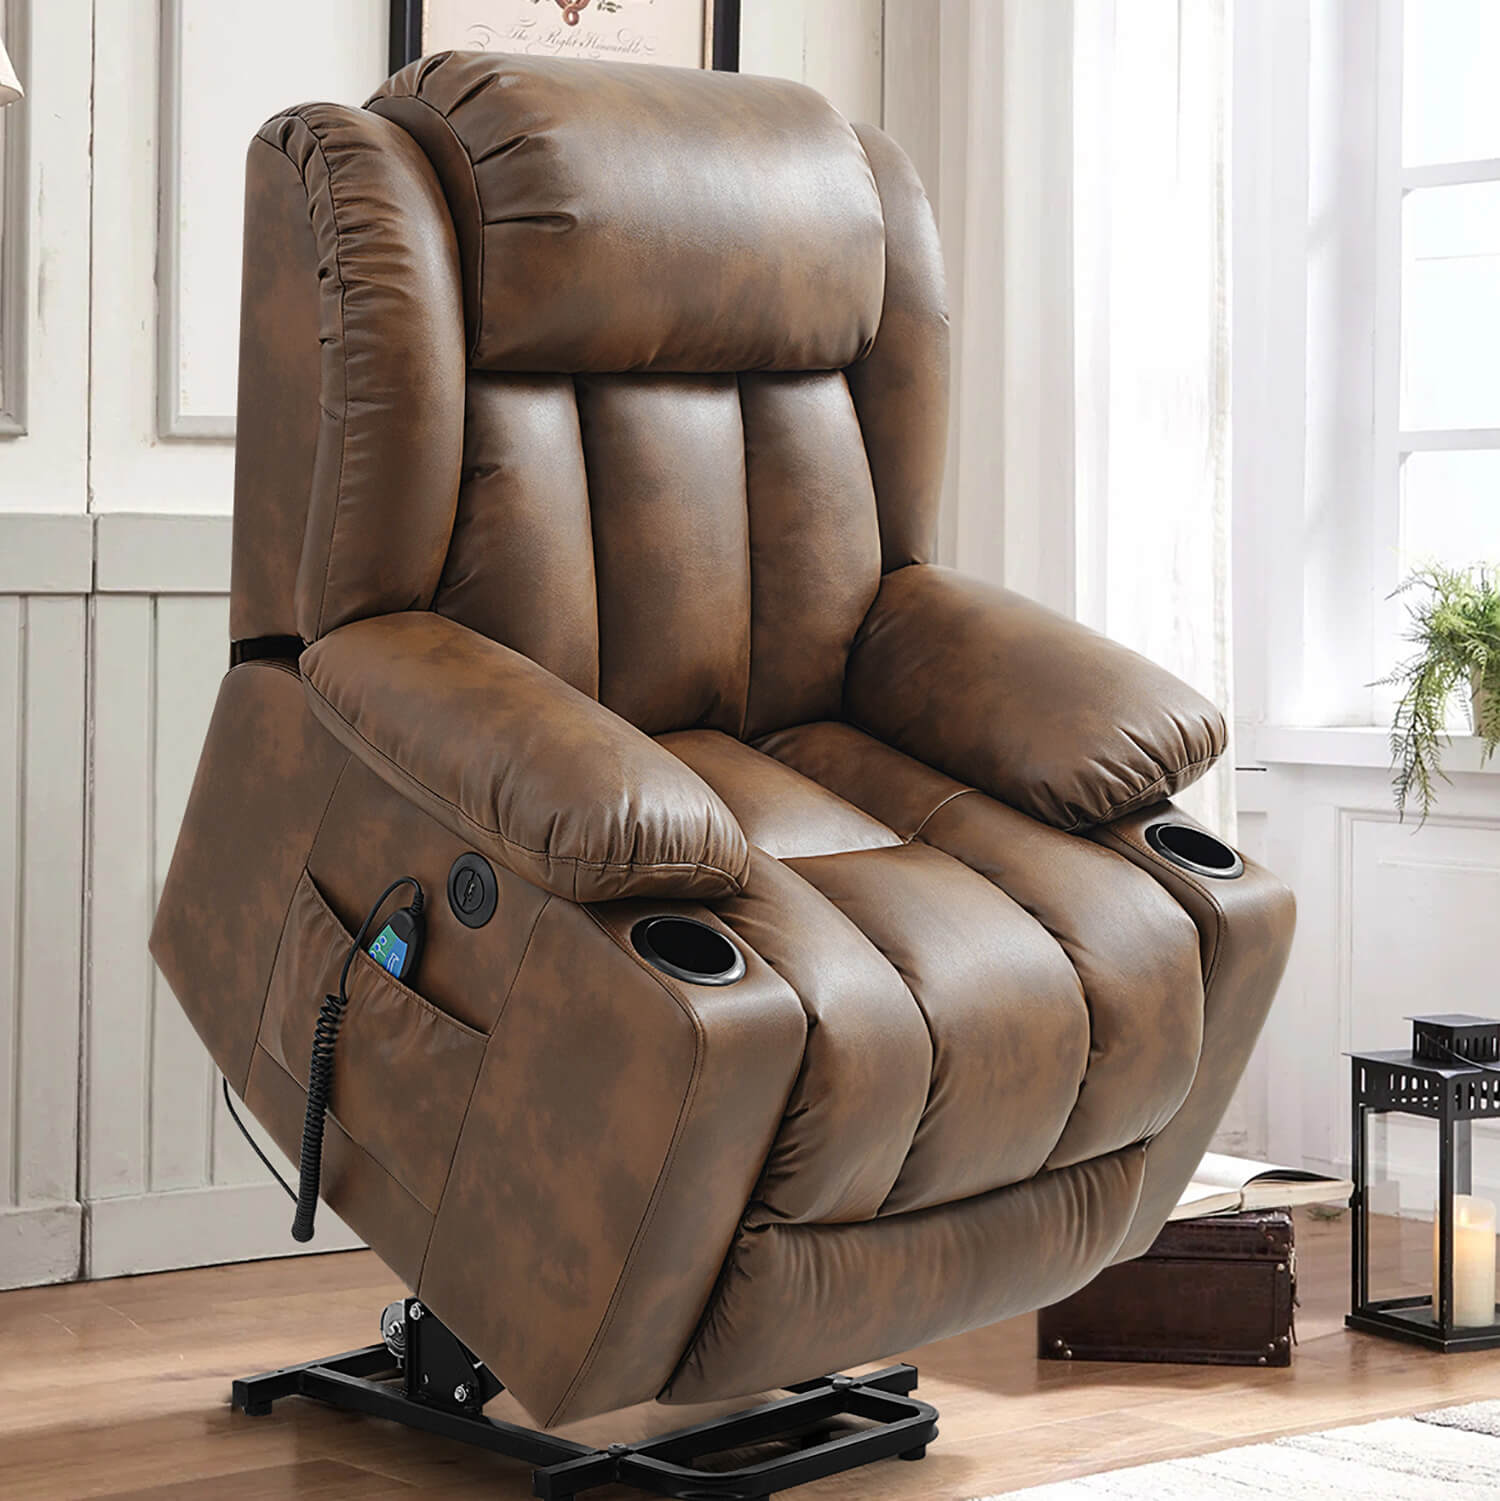 Large Infinite Position Lift Chair Recliners - Soulout